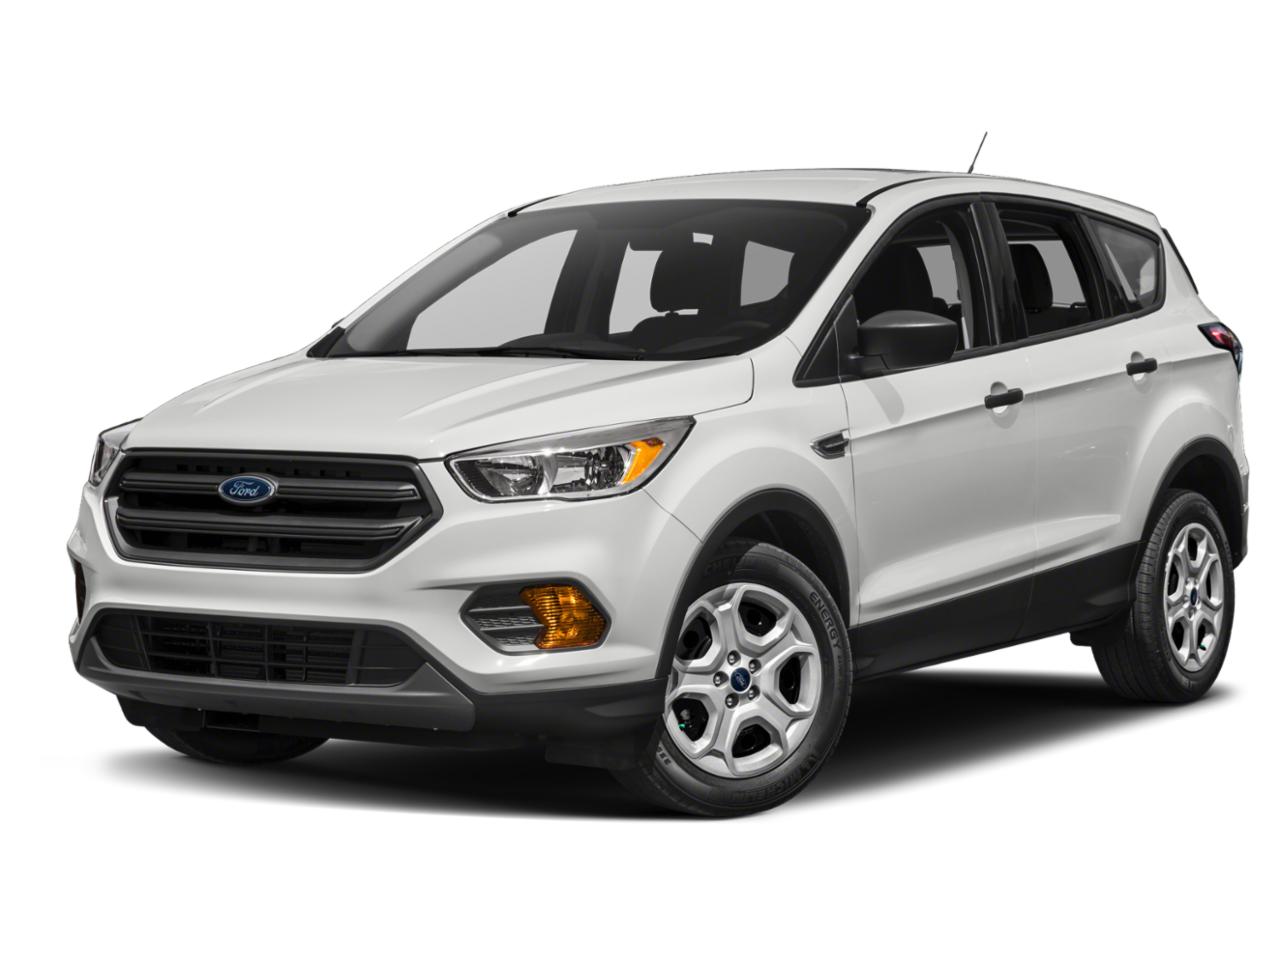 2019 Ford Escape Vehicle Photo in Plainfield, IL 60586